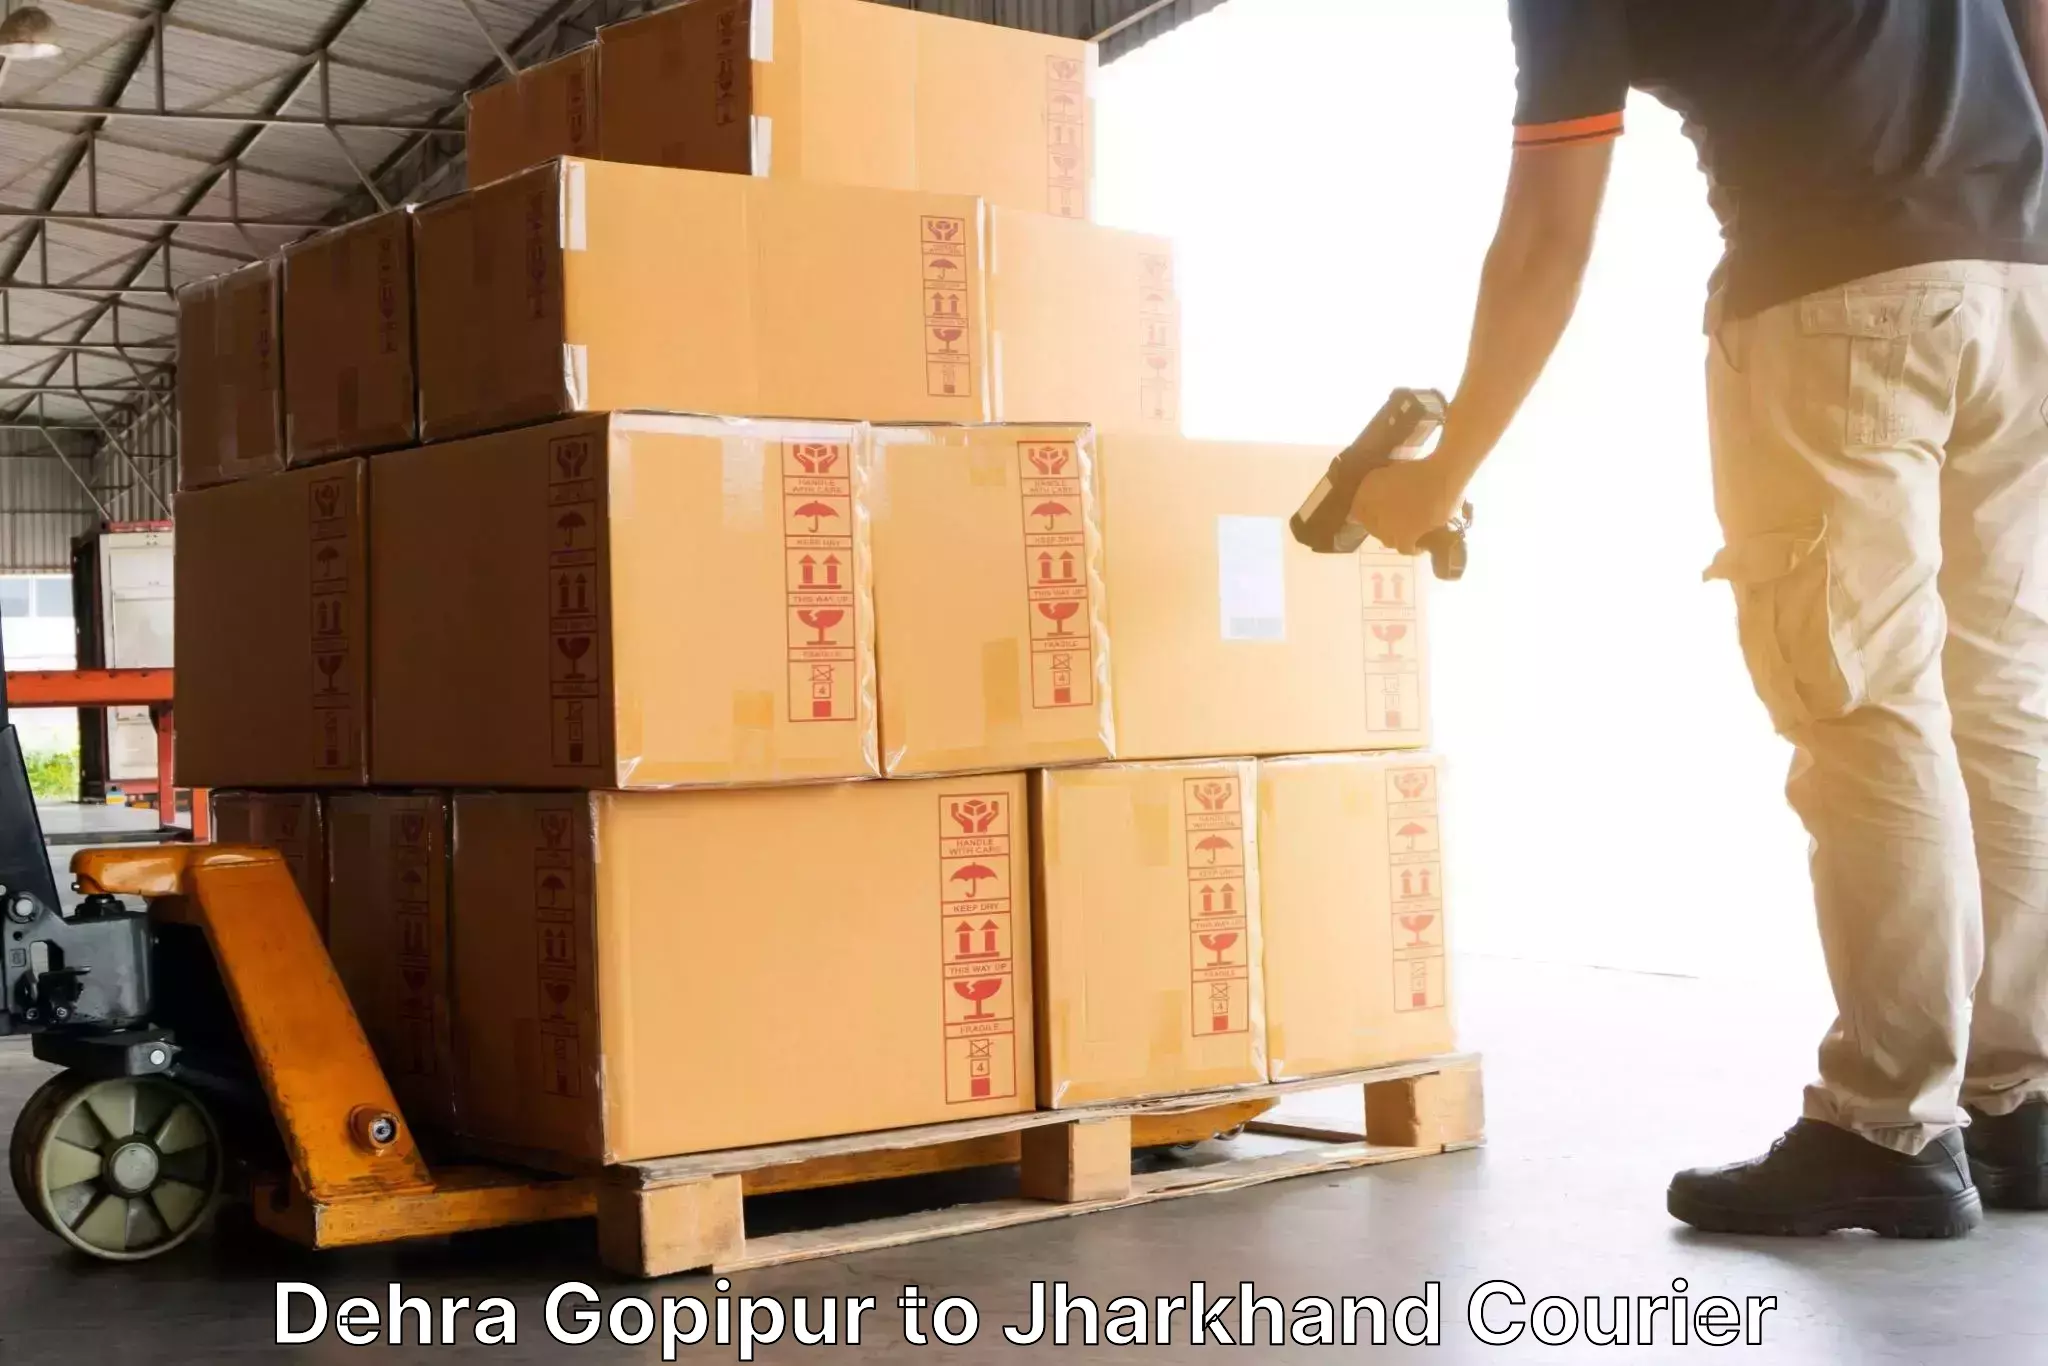 Global shipping solutions Dehra Gopipur to Manoharpur